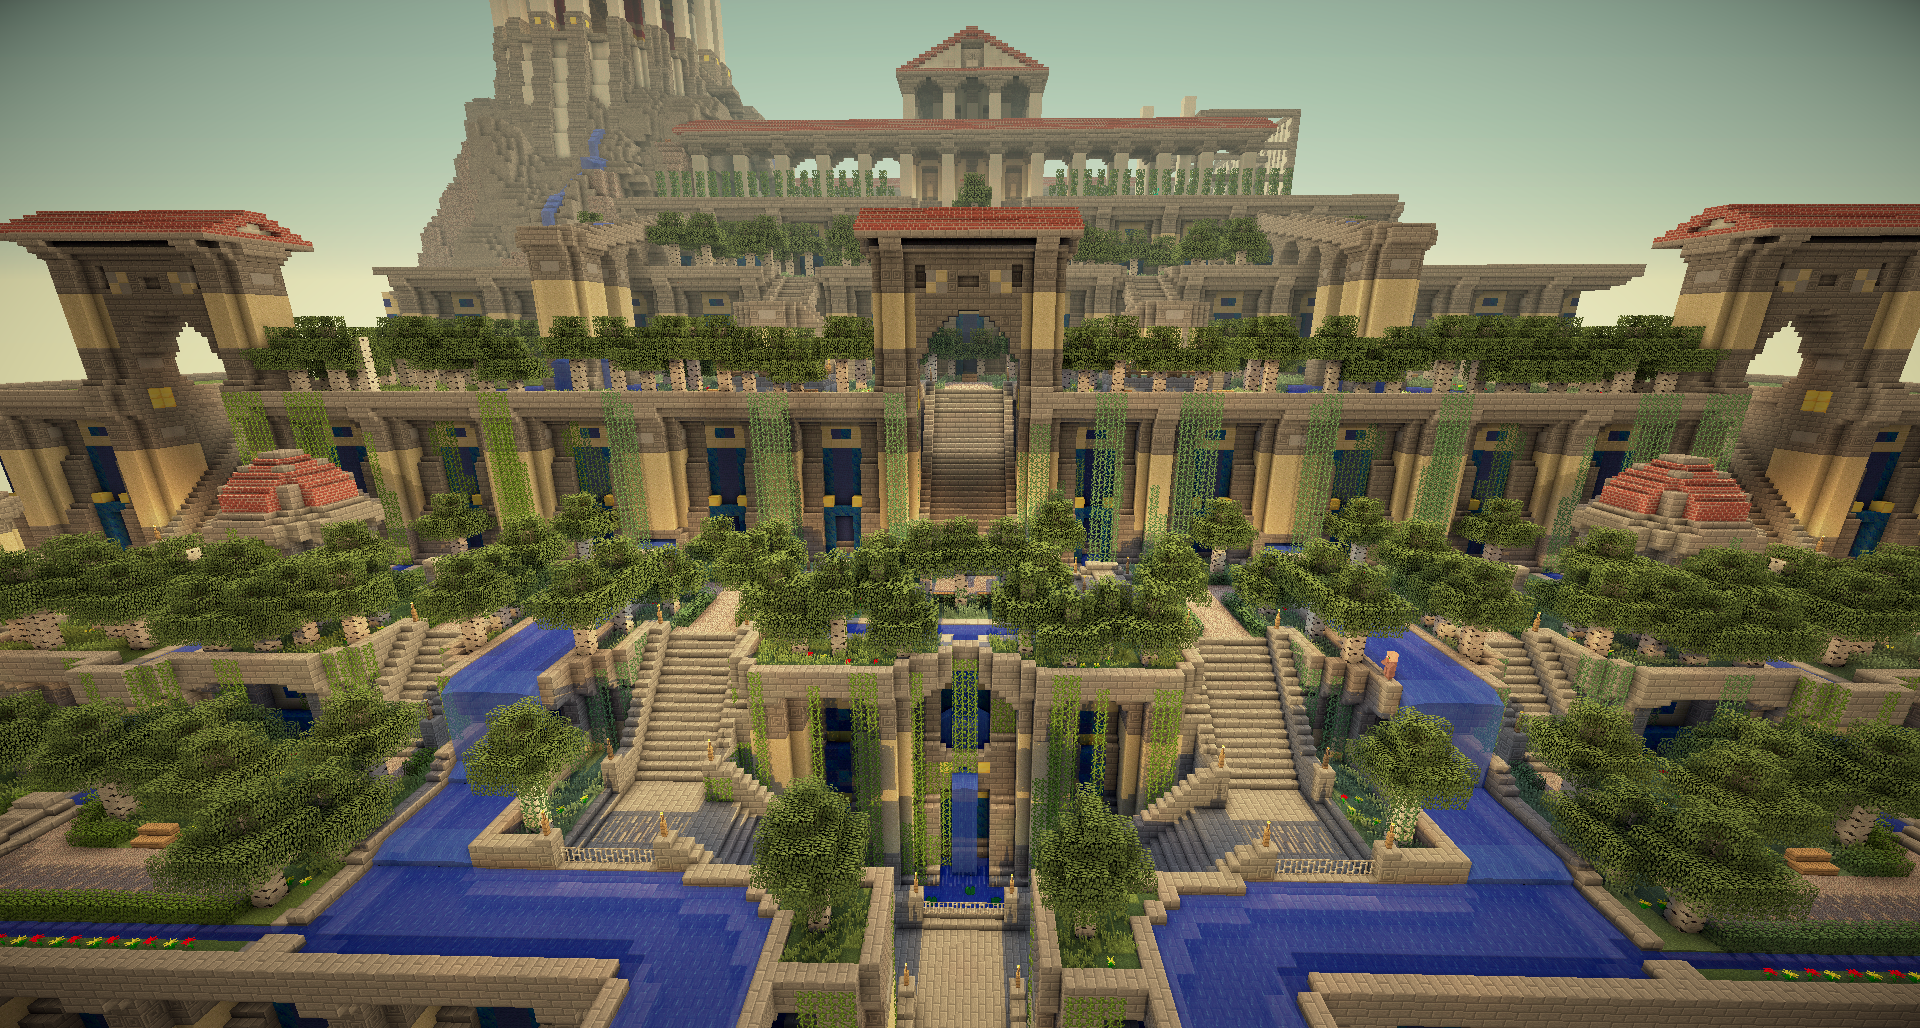 Oh, you know, just the Hanging Gardens of Babylon : Minecraft